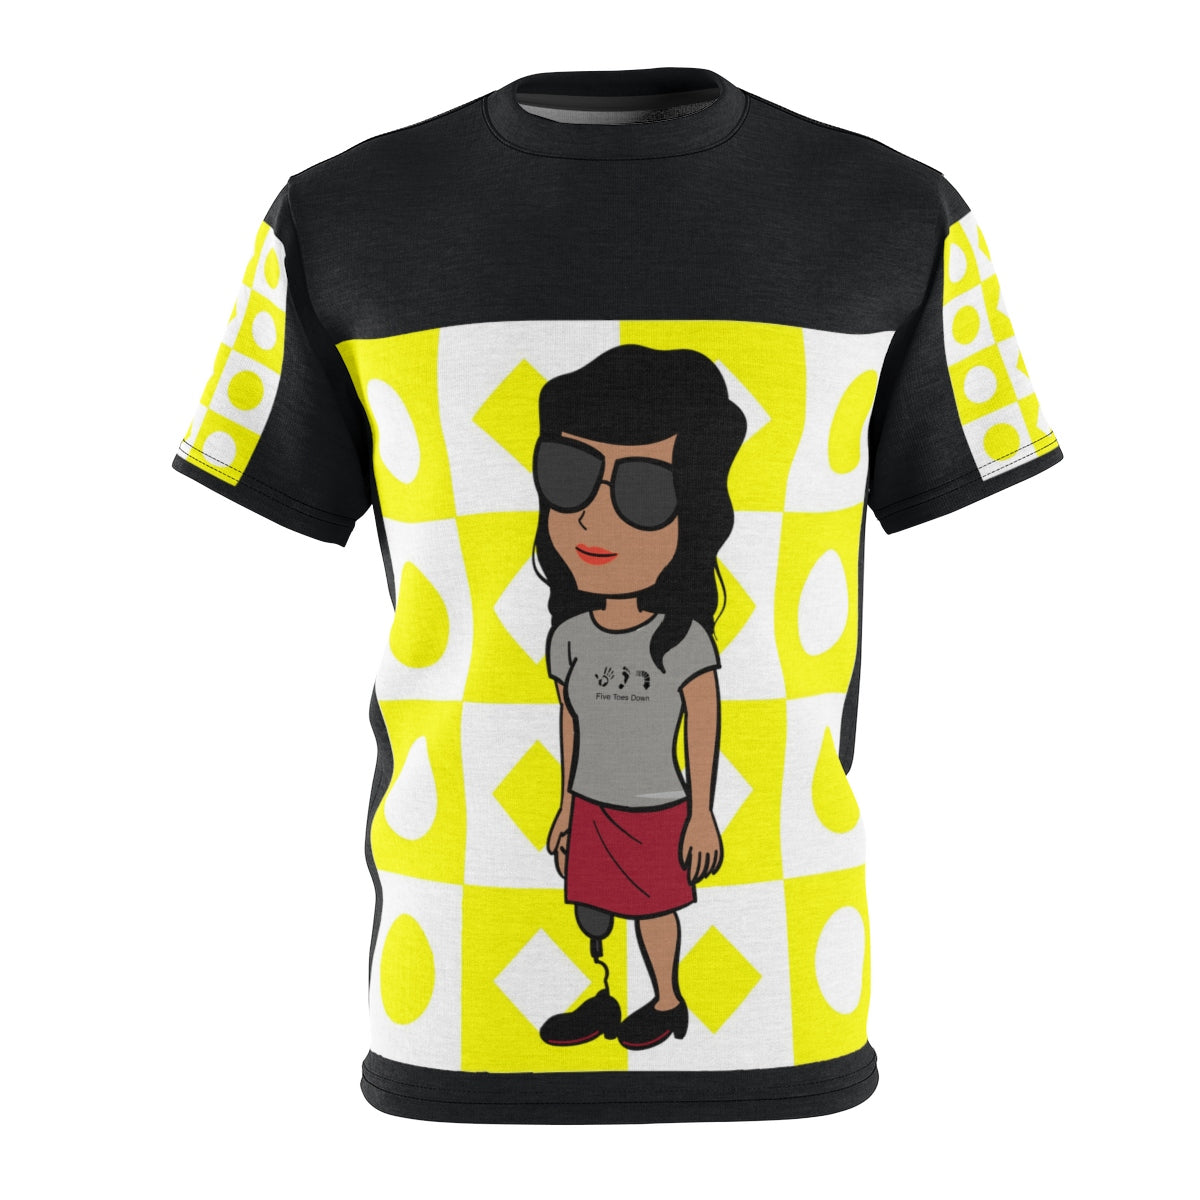 Five Toes Down Girl Power Blk/Yellow Unisex Cut & Sew Tee